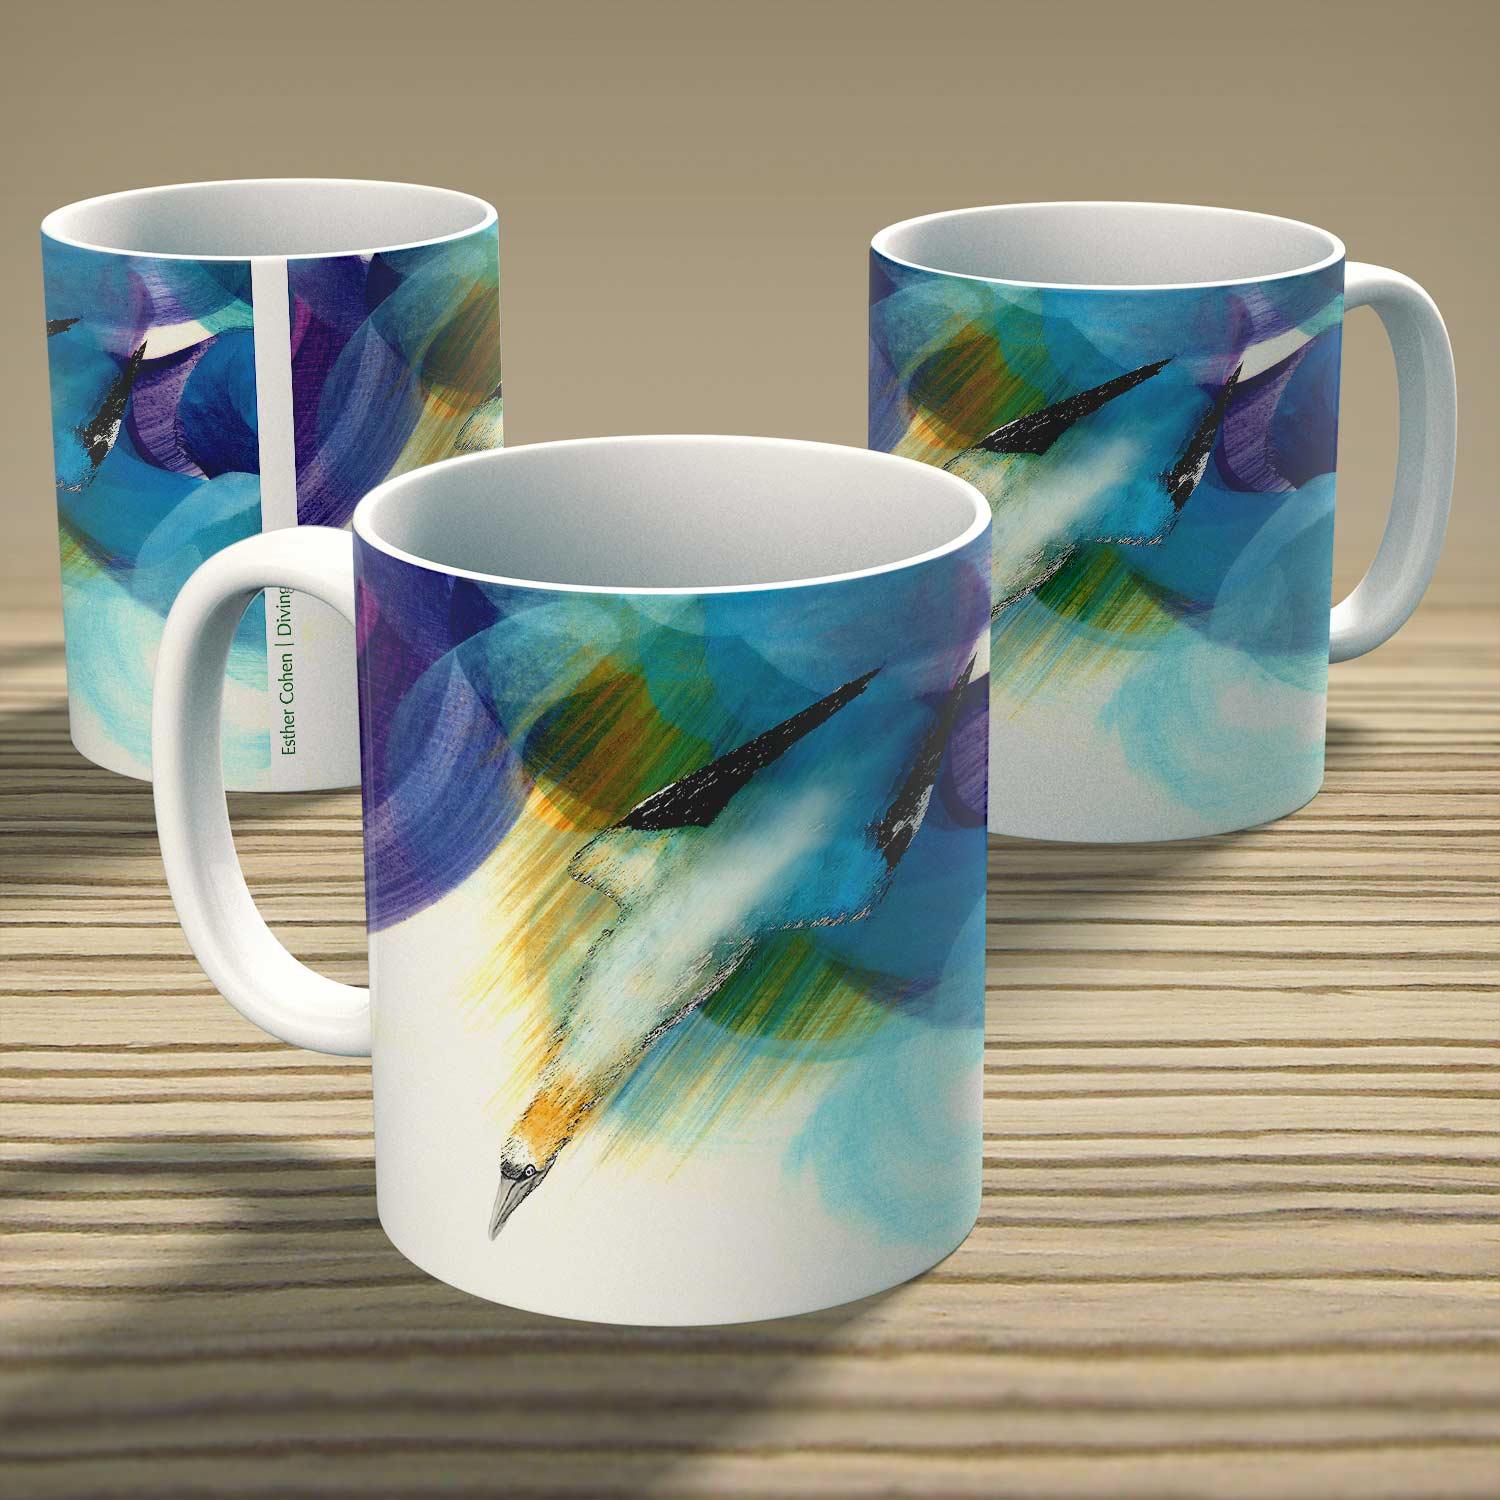 Diving Sula Mug from an original painting by artist Esther Cohen